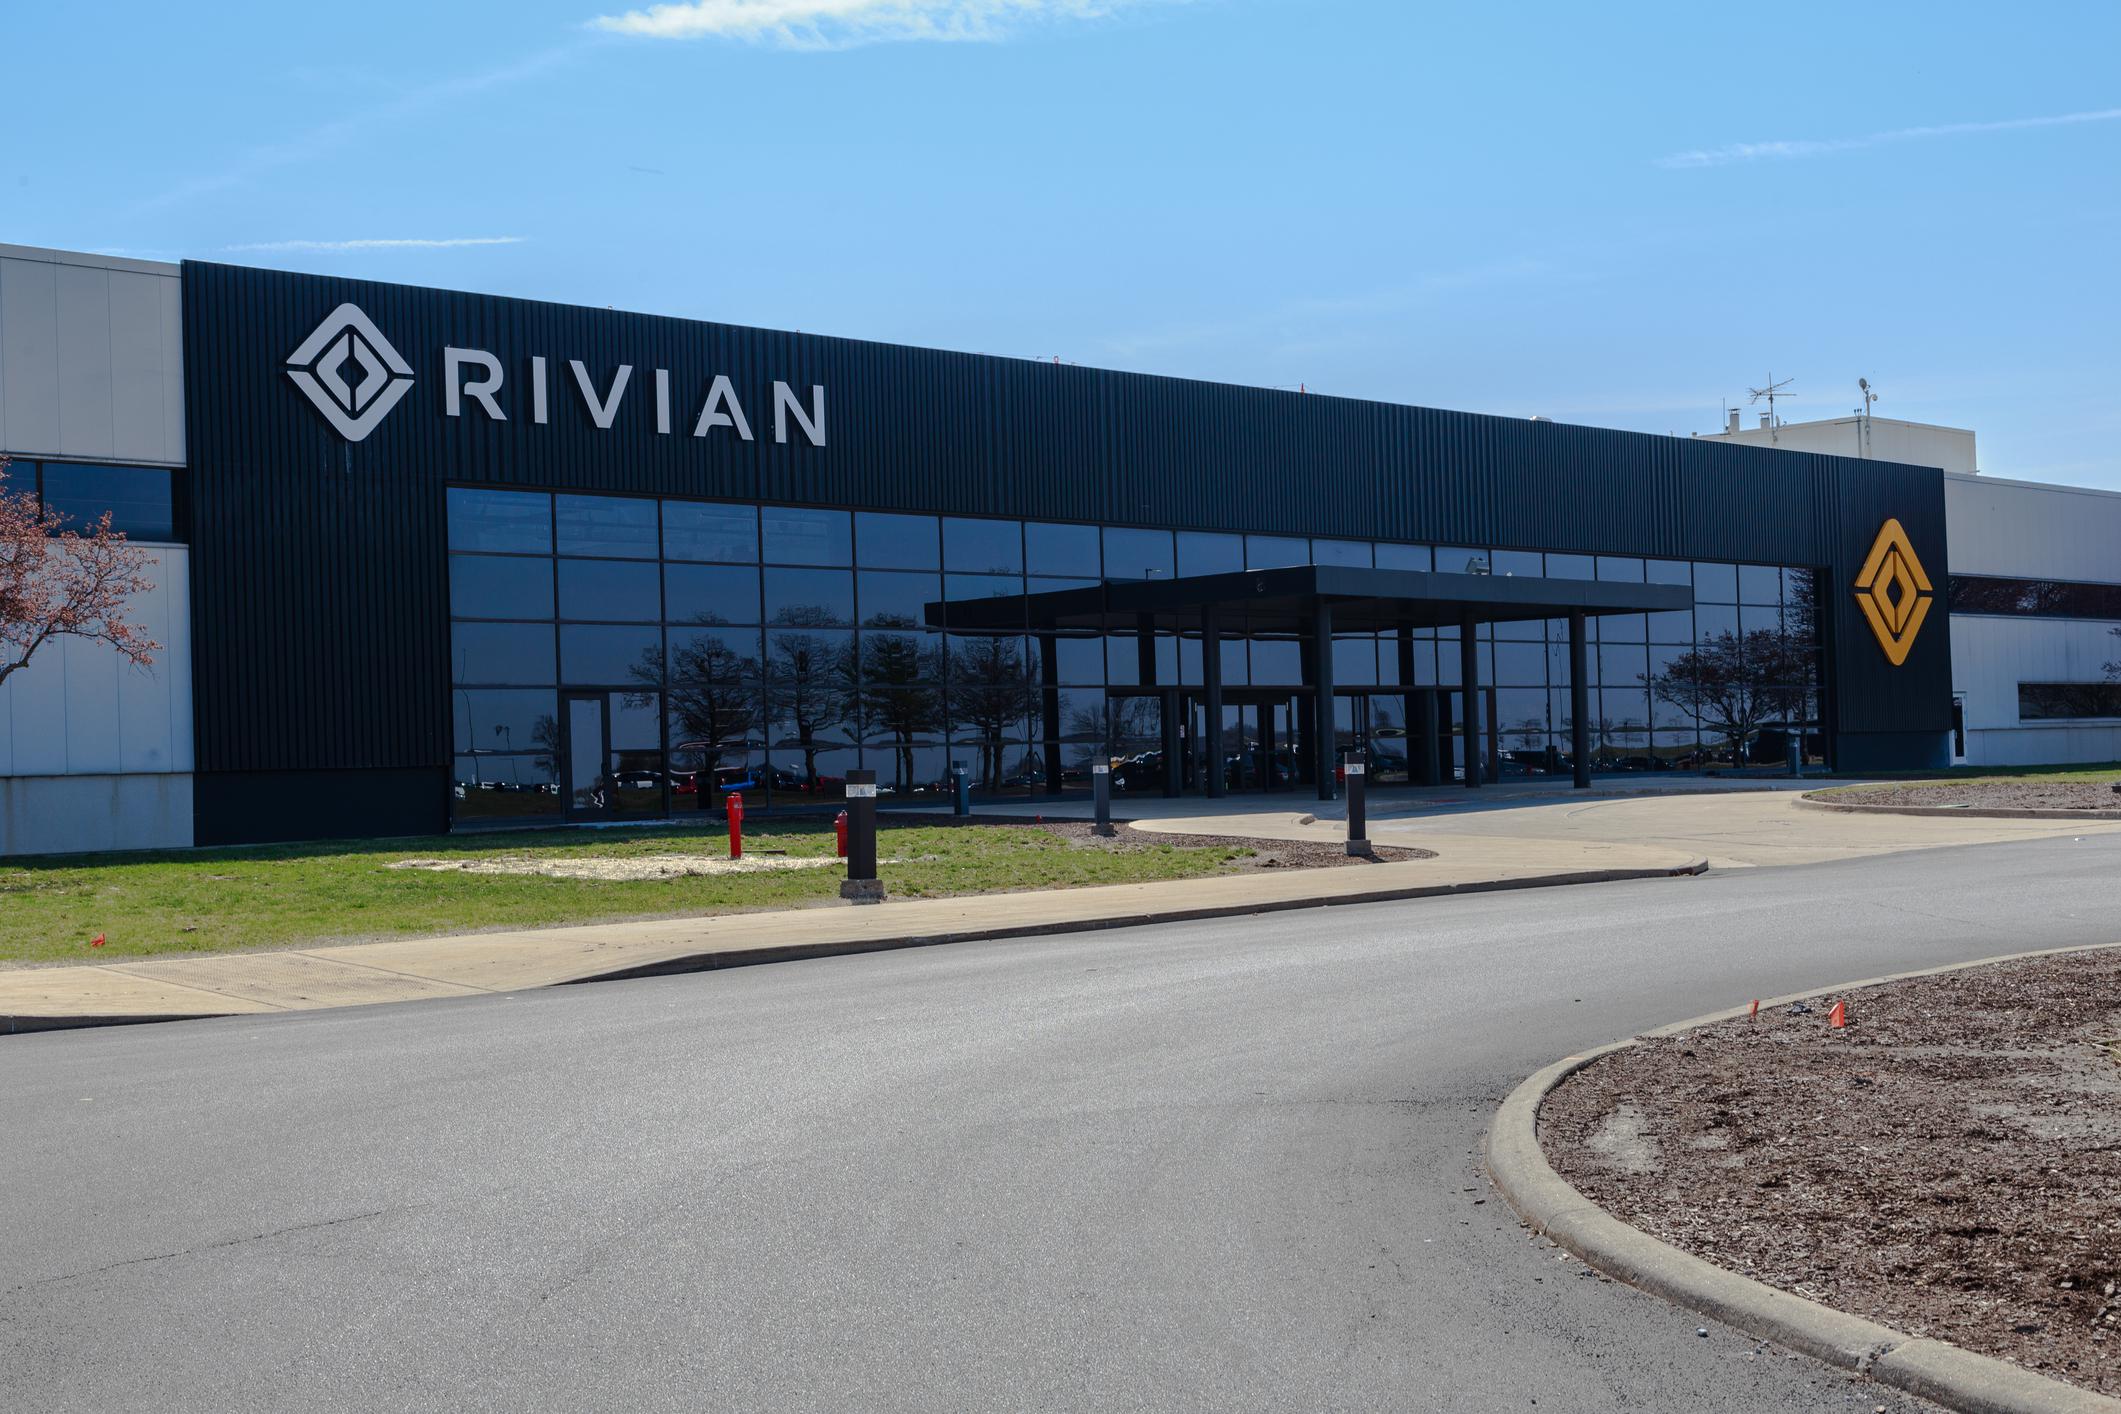 Rivian increased production in second quarter at Illinois factory